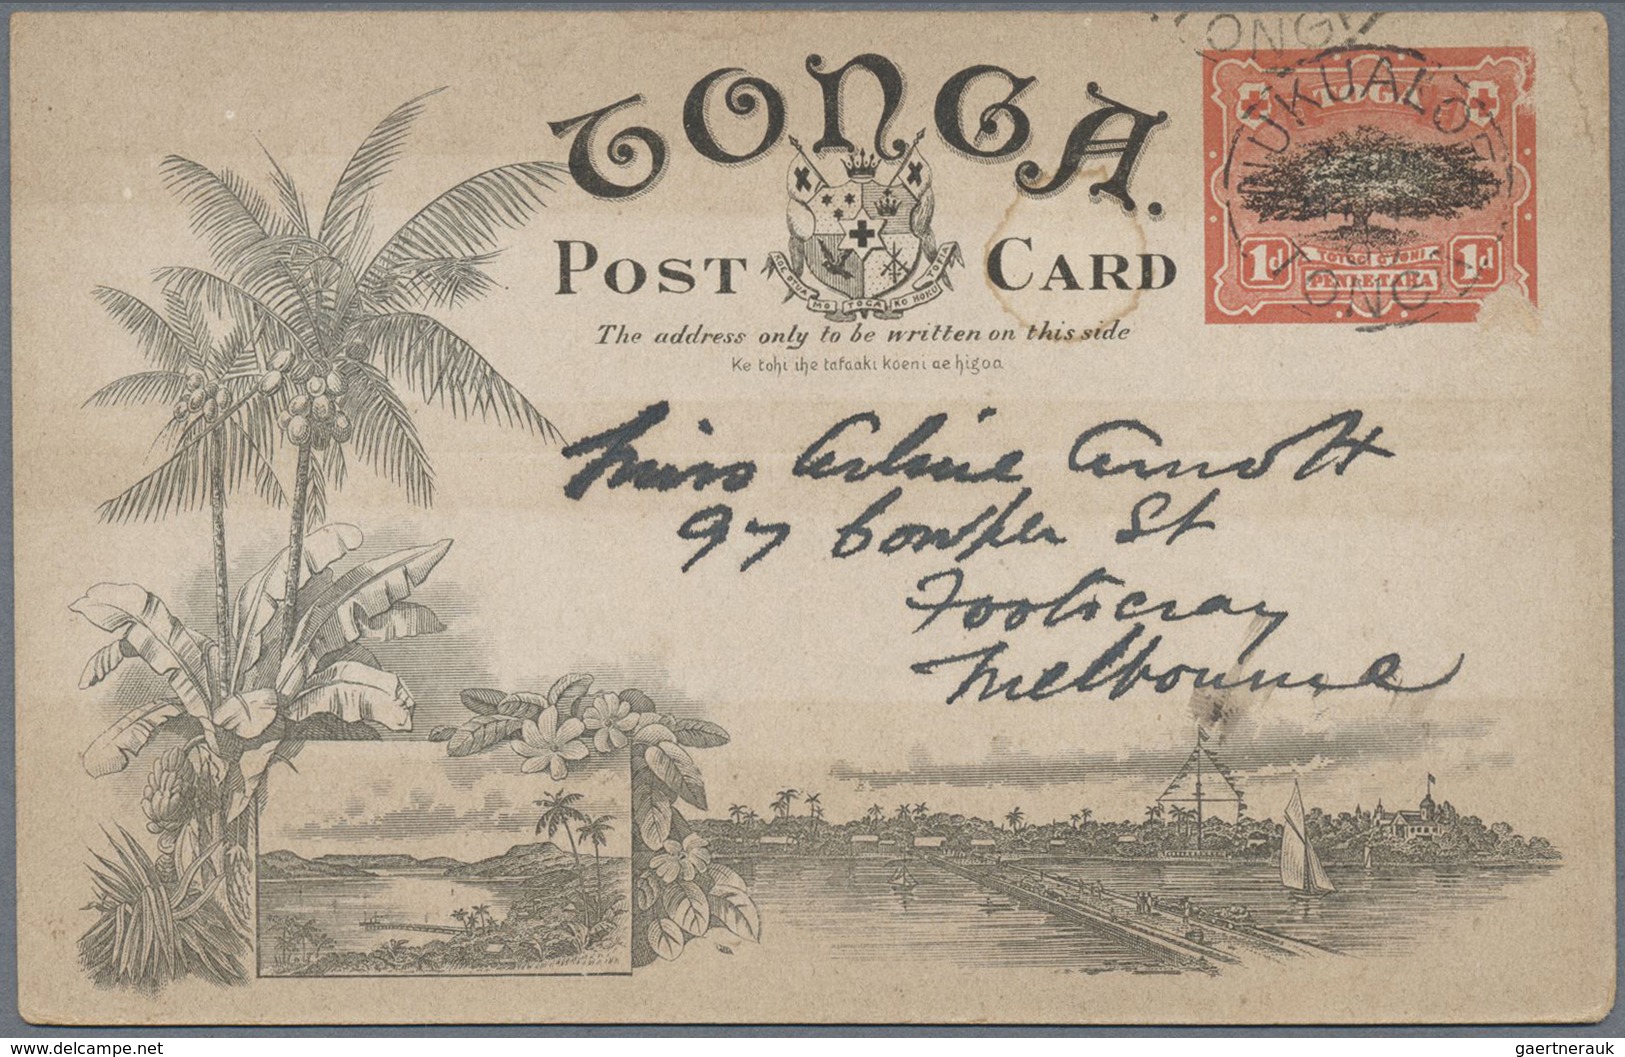 GA Tonga: 1910, four 1 d stationery cards with coloured pictures on backside all sent from NUKUALOFA to